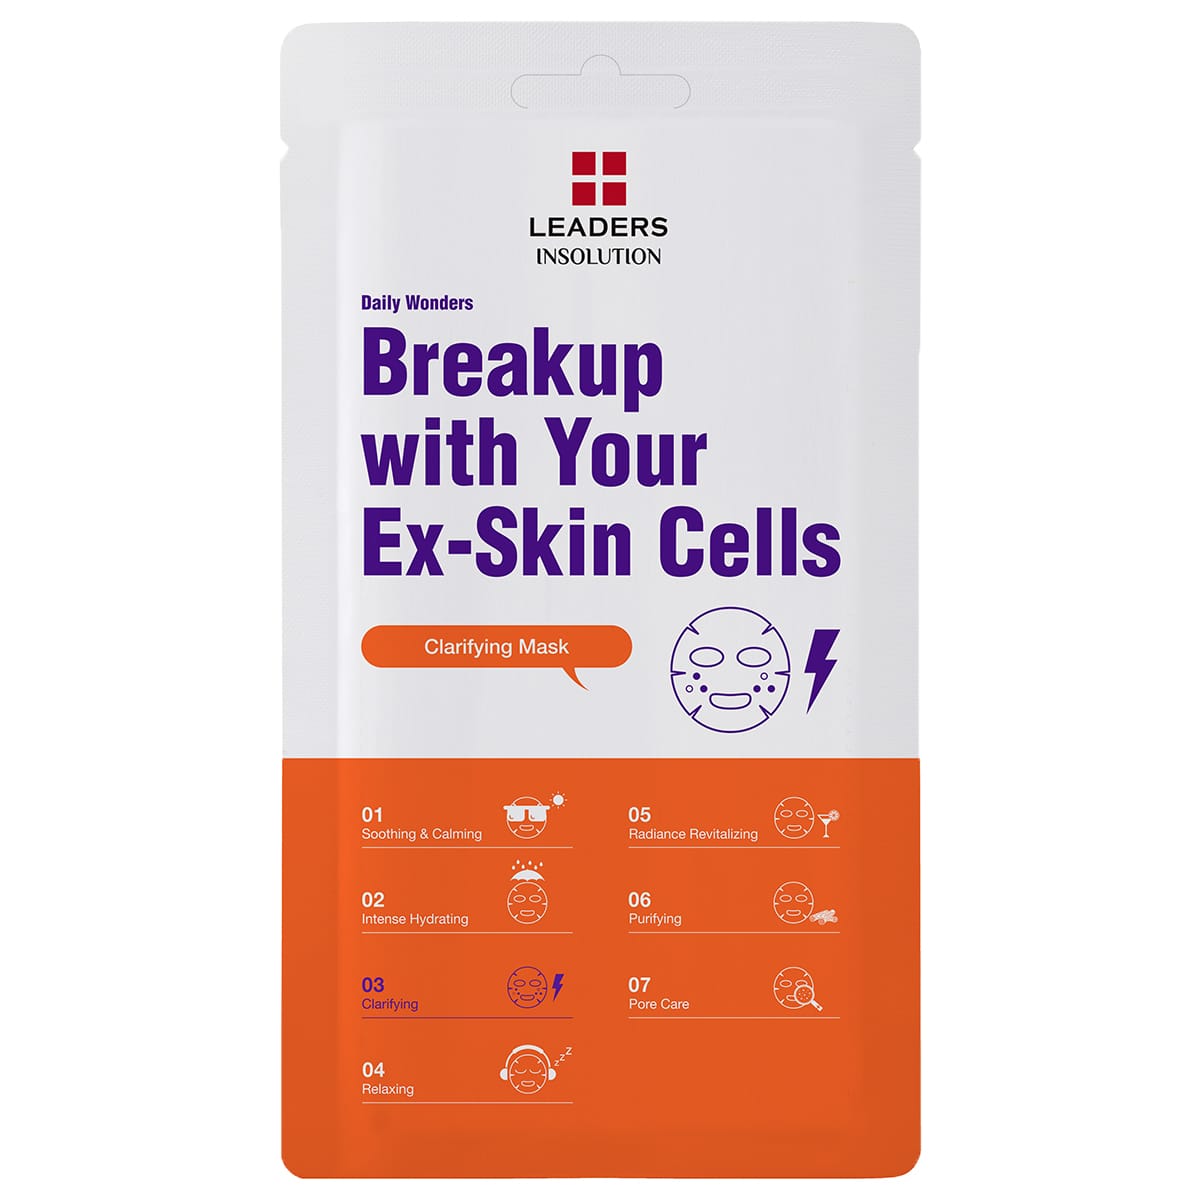 Daily Wonders Breakup With Your Ex-Skin Cells Clarifying Mask | Leaders